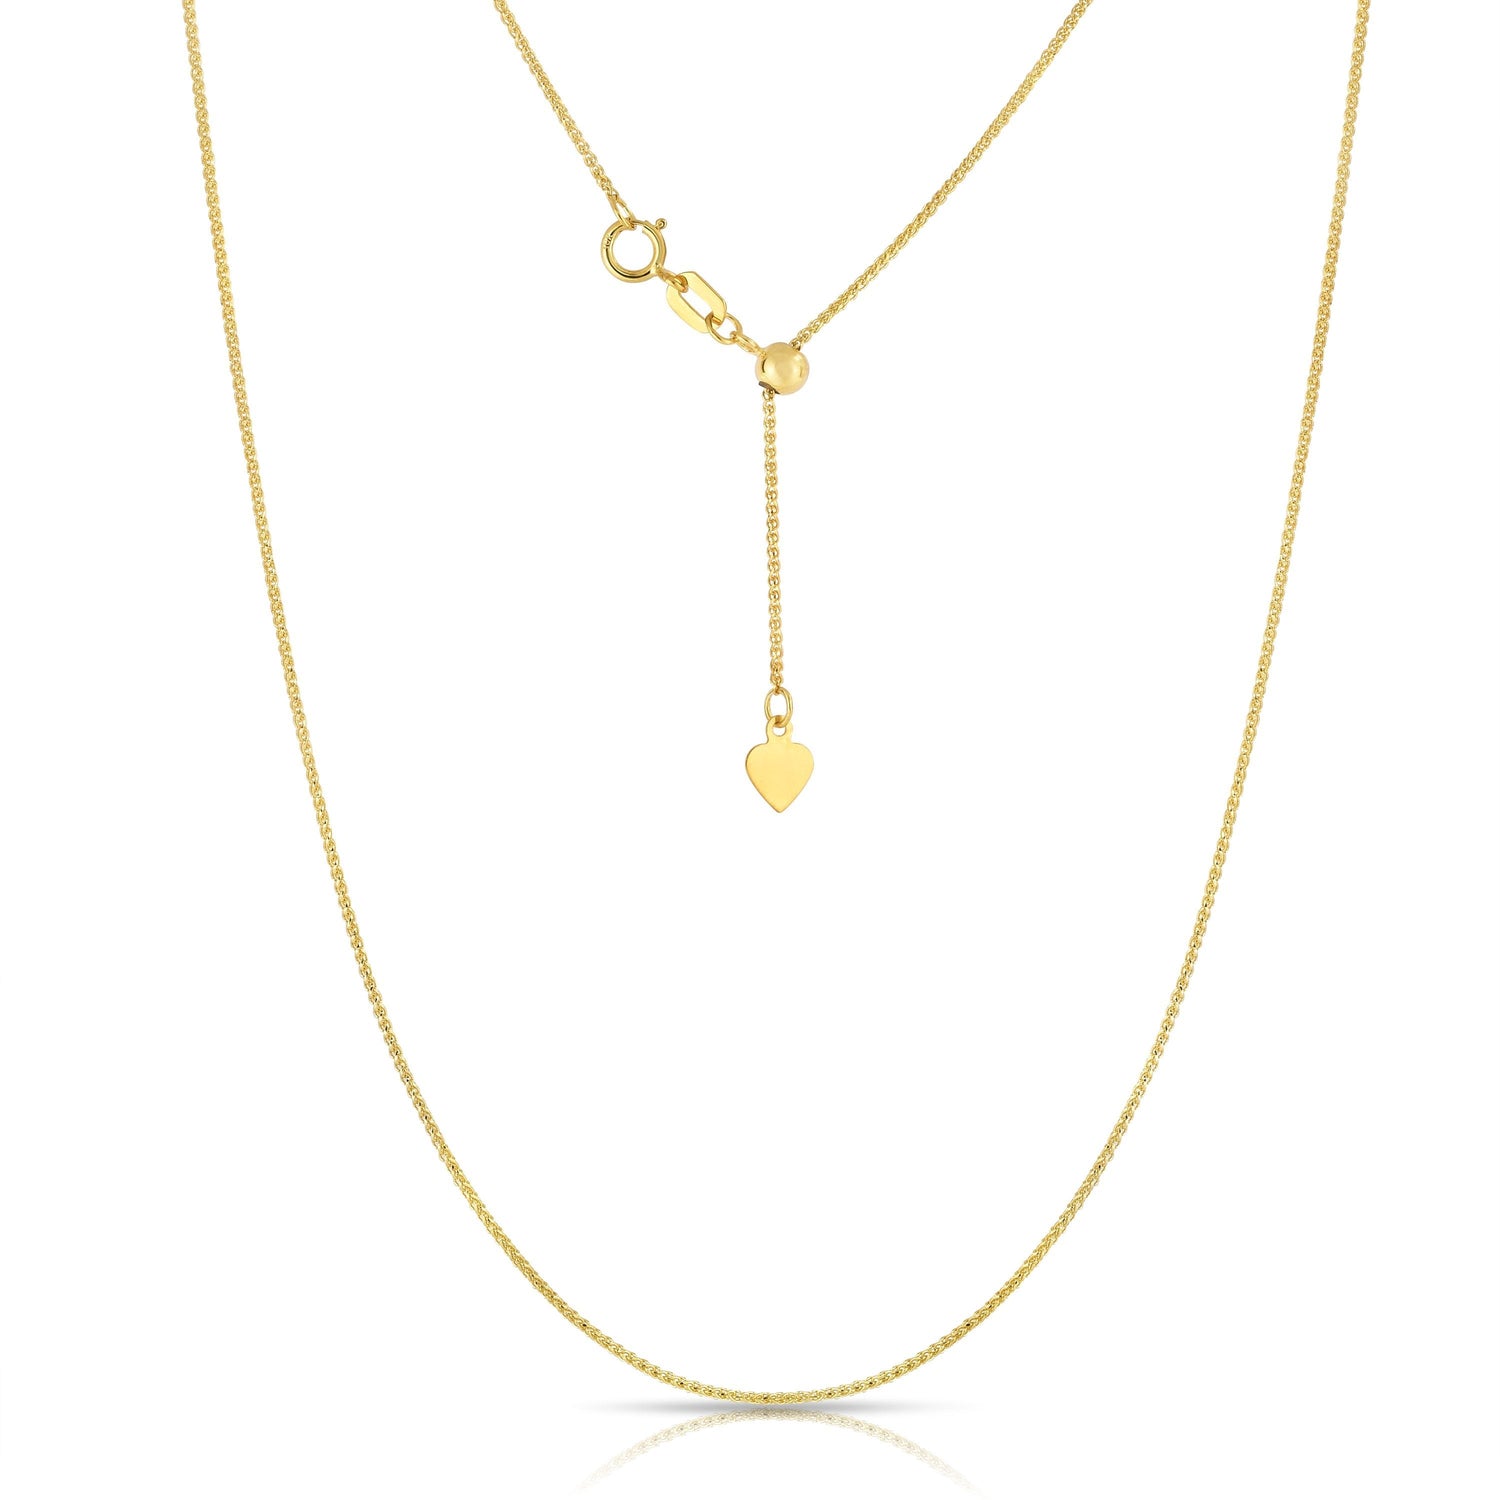 10K Fine Gold Adjustable Wheat Chain necklace, 24 Inch